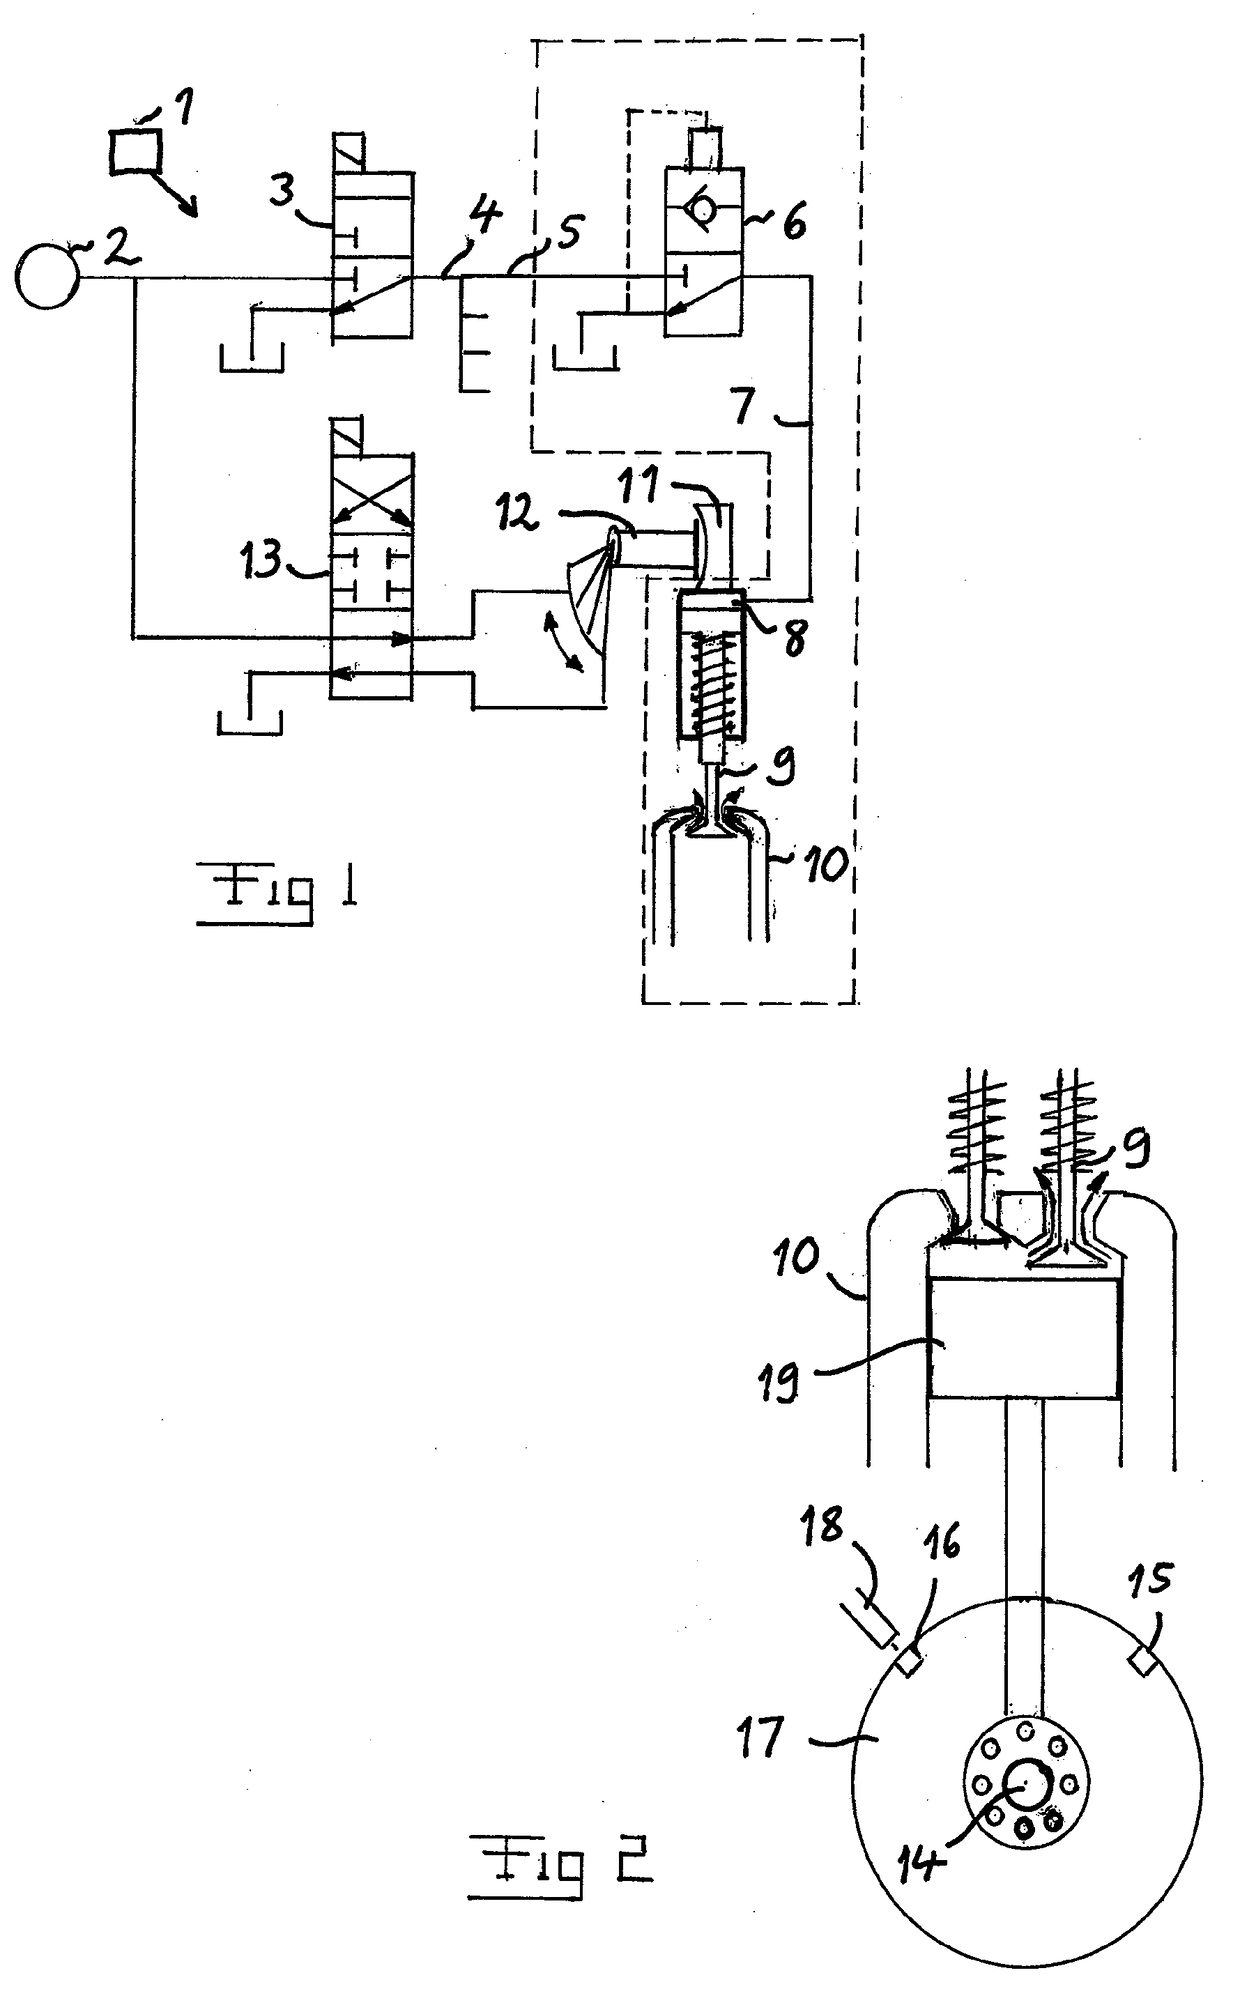 Method for checking the function of a compression release brake system